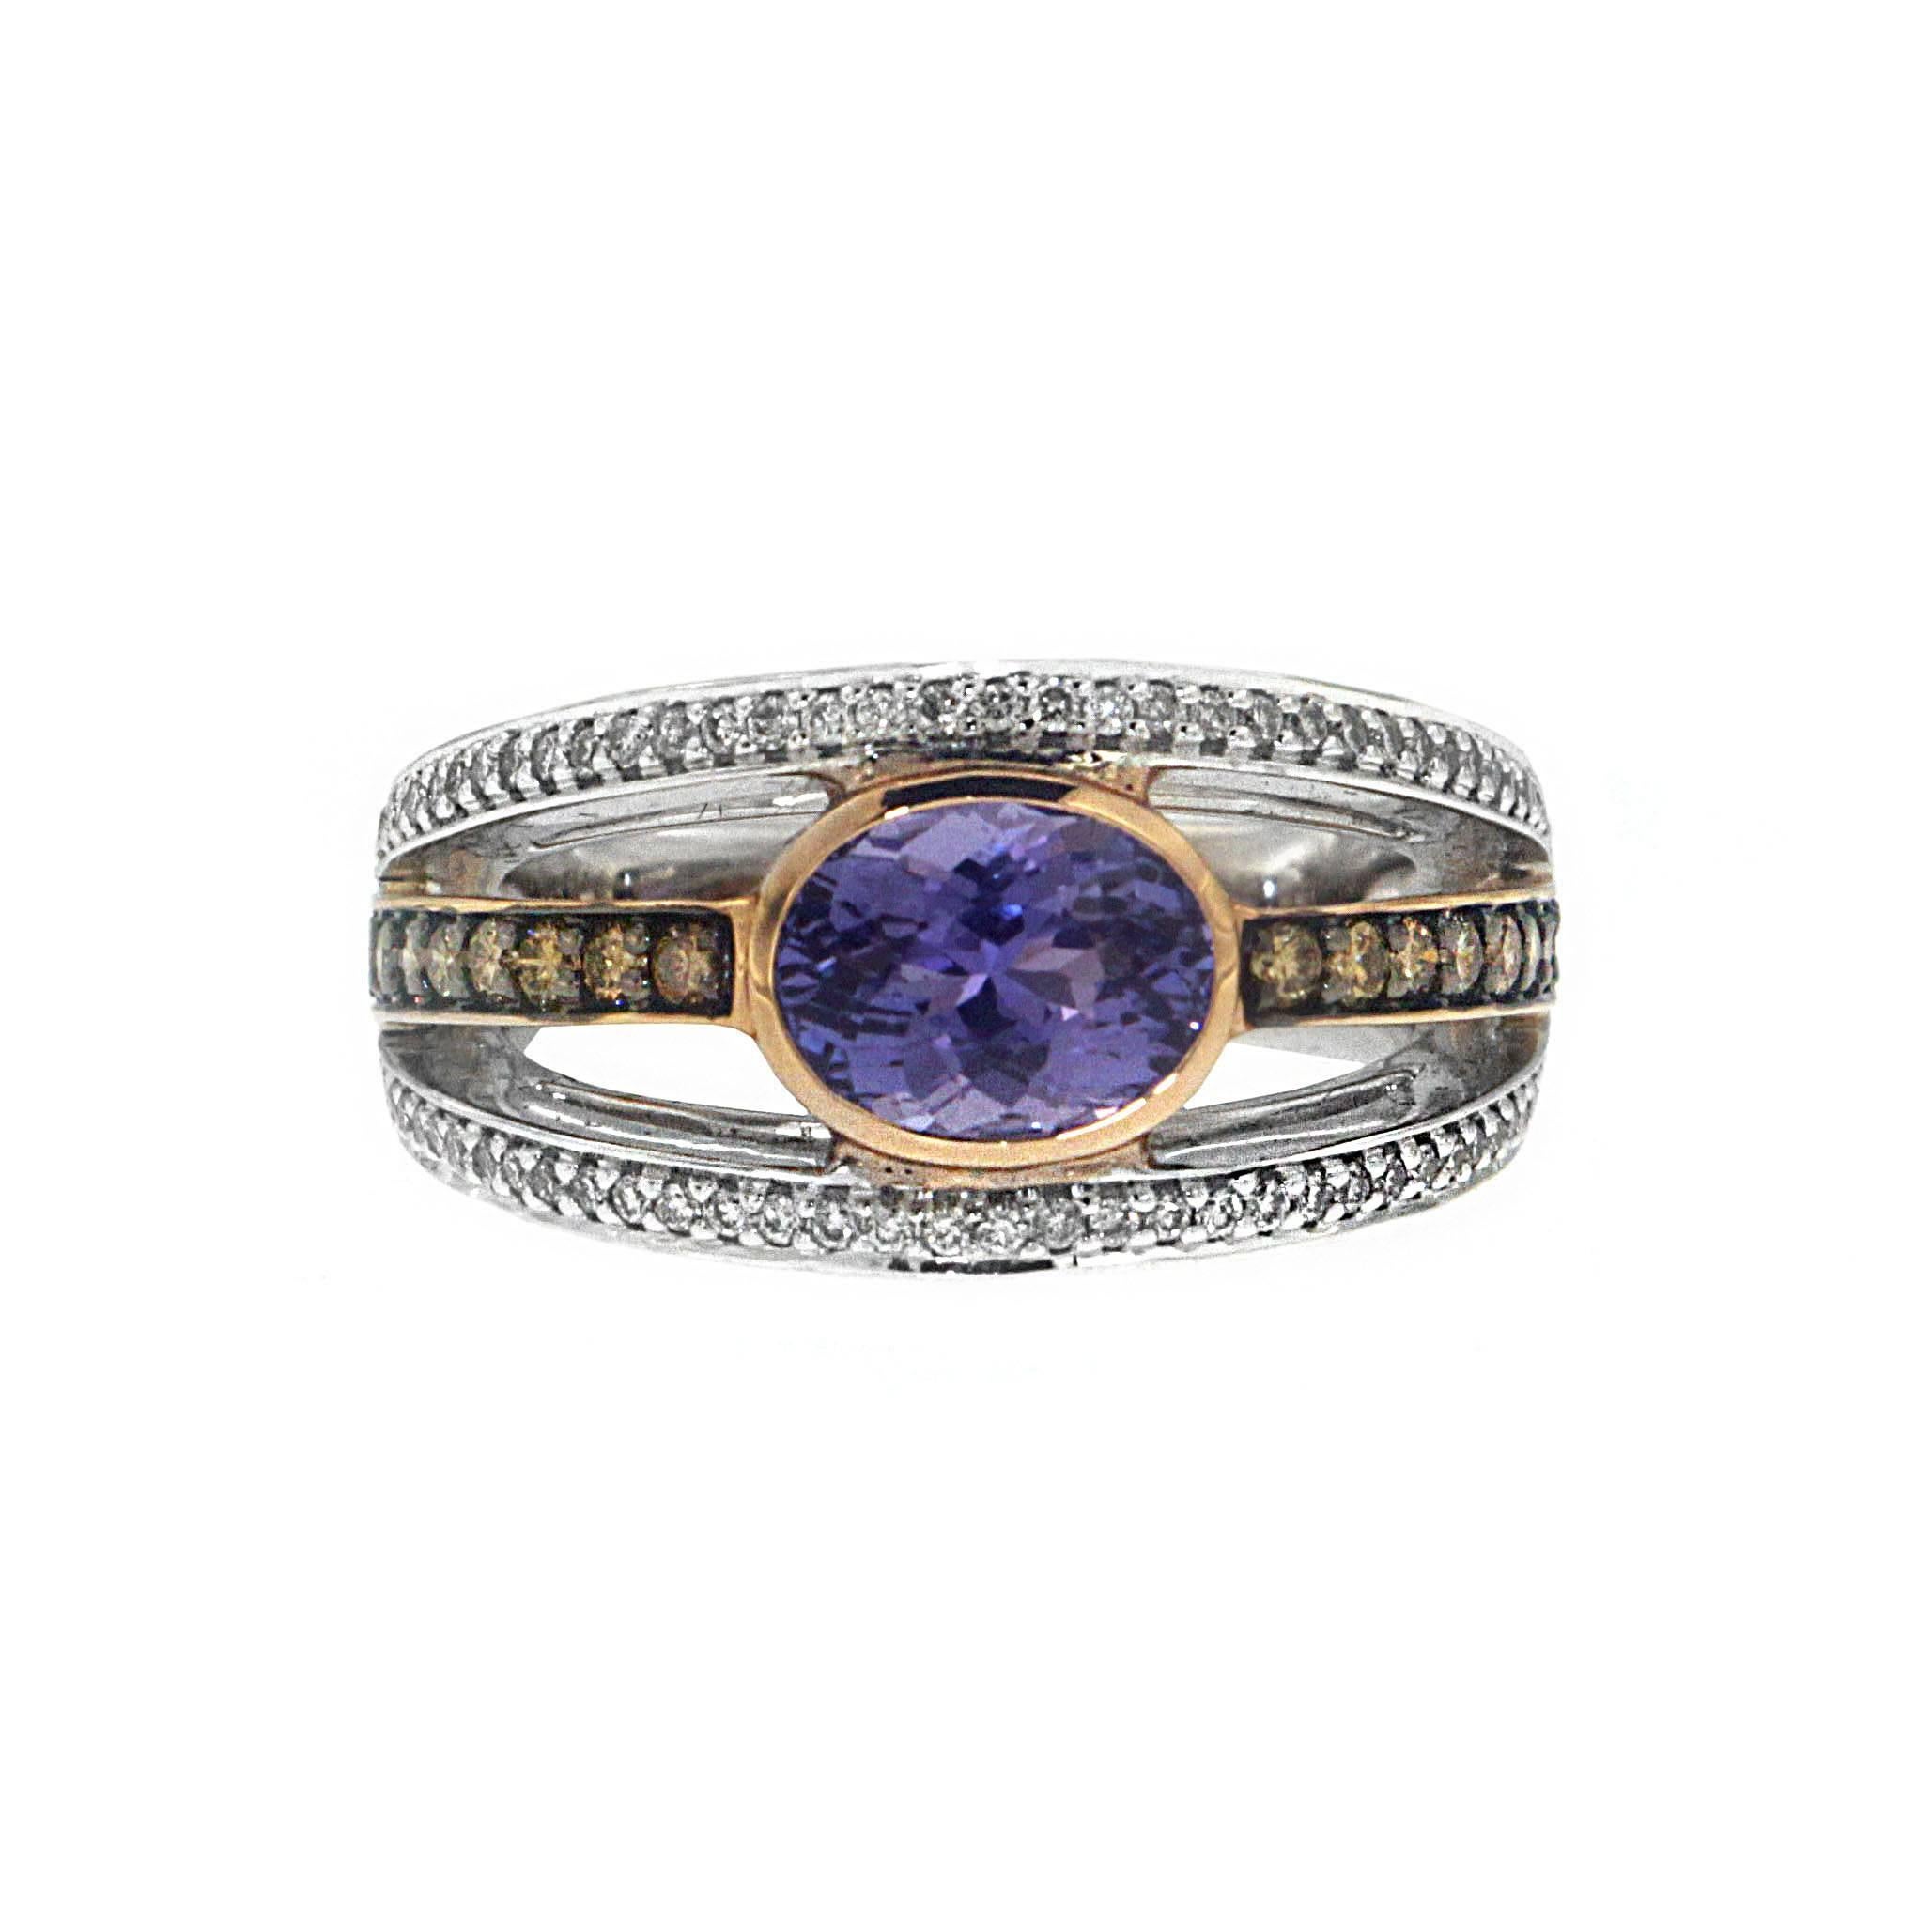 Set with a central stone from 2.65 carats of unmistakably mysterious tanzanite, the cyclical element of this ring is split into three to create an utterly unique effect.

The integral ring is fashioned from a quality yellow gold, and the two outer